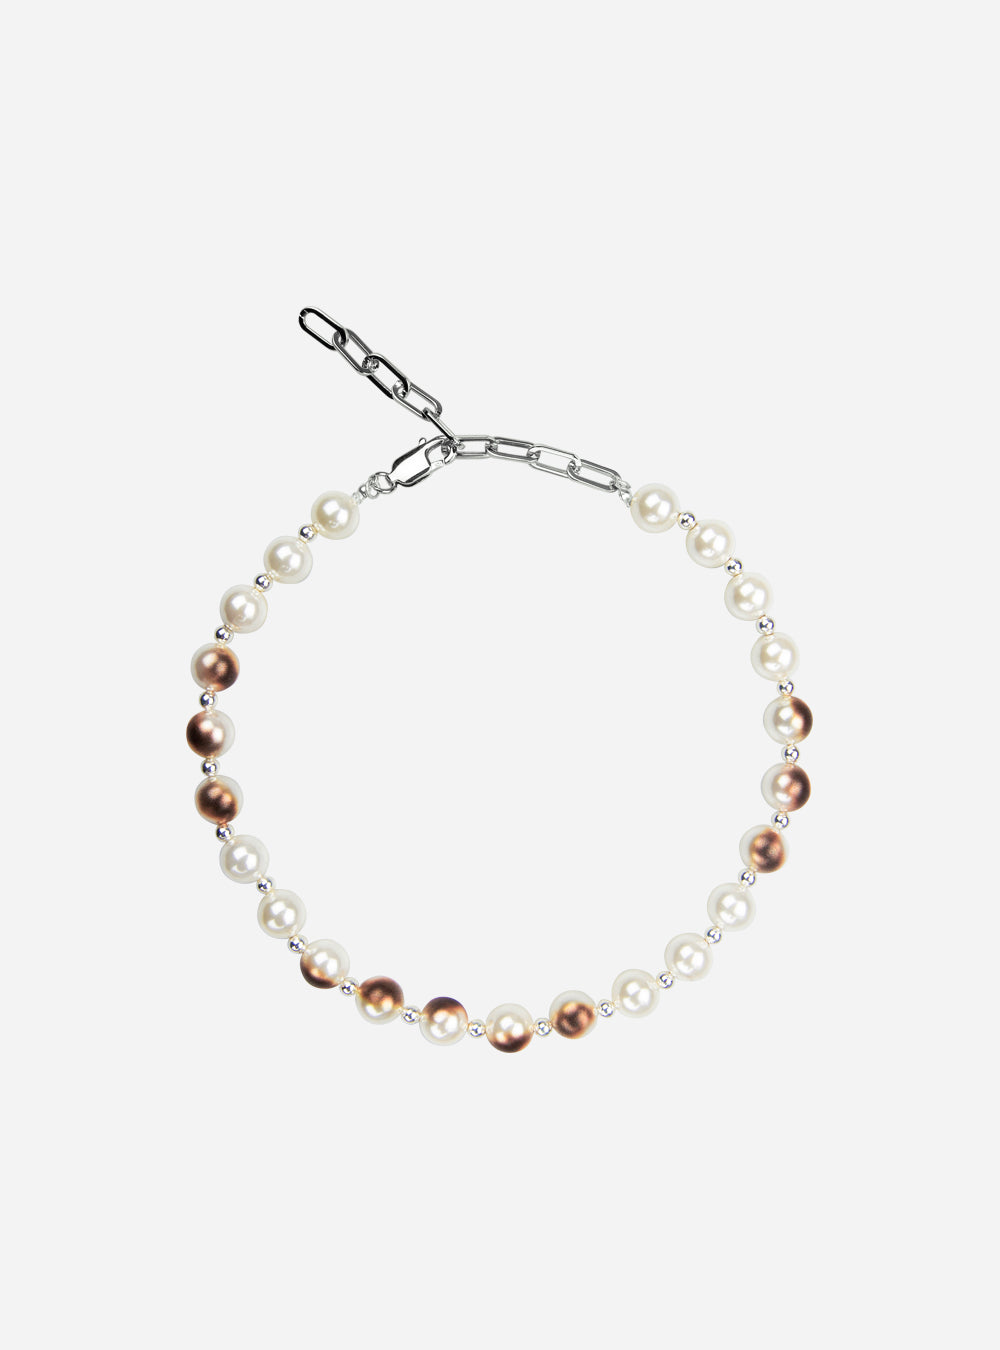 a Midnightfactory burnt pearls with silver beads necklace on a white background.